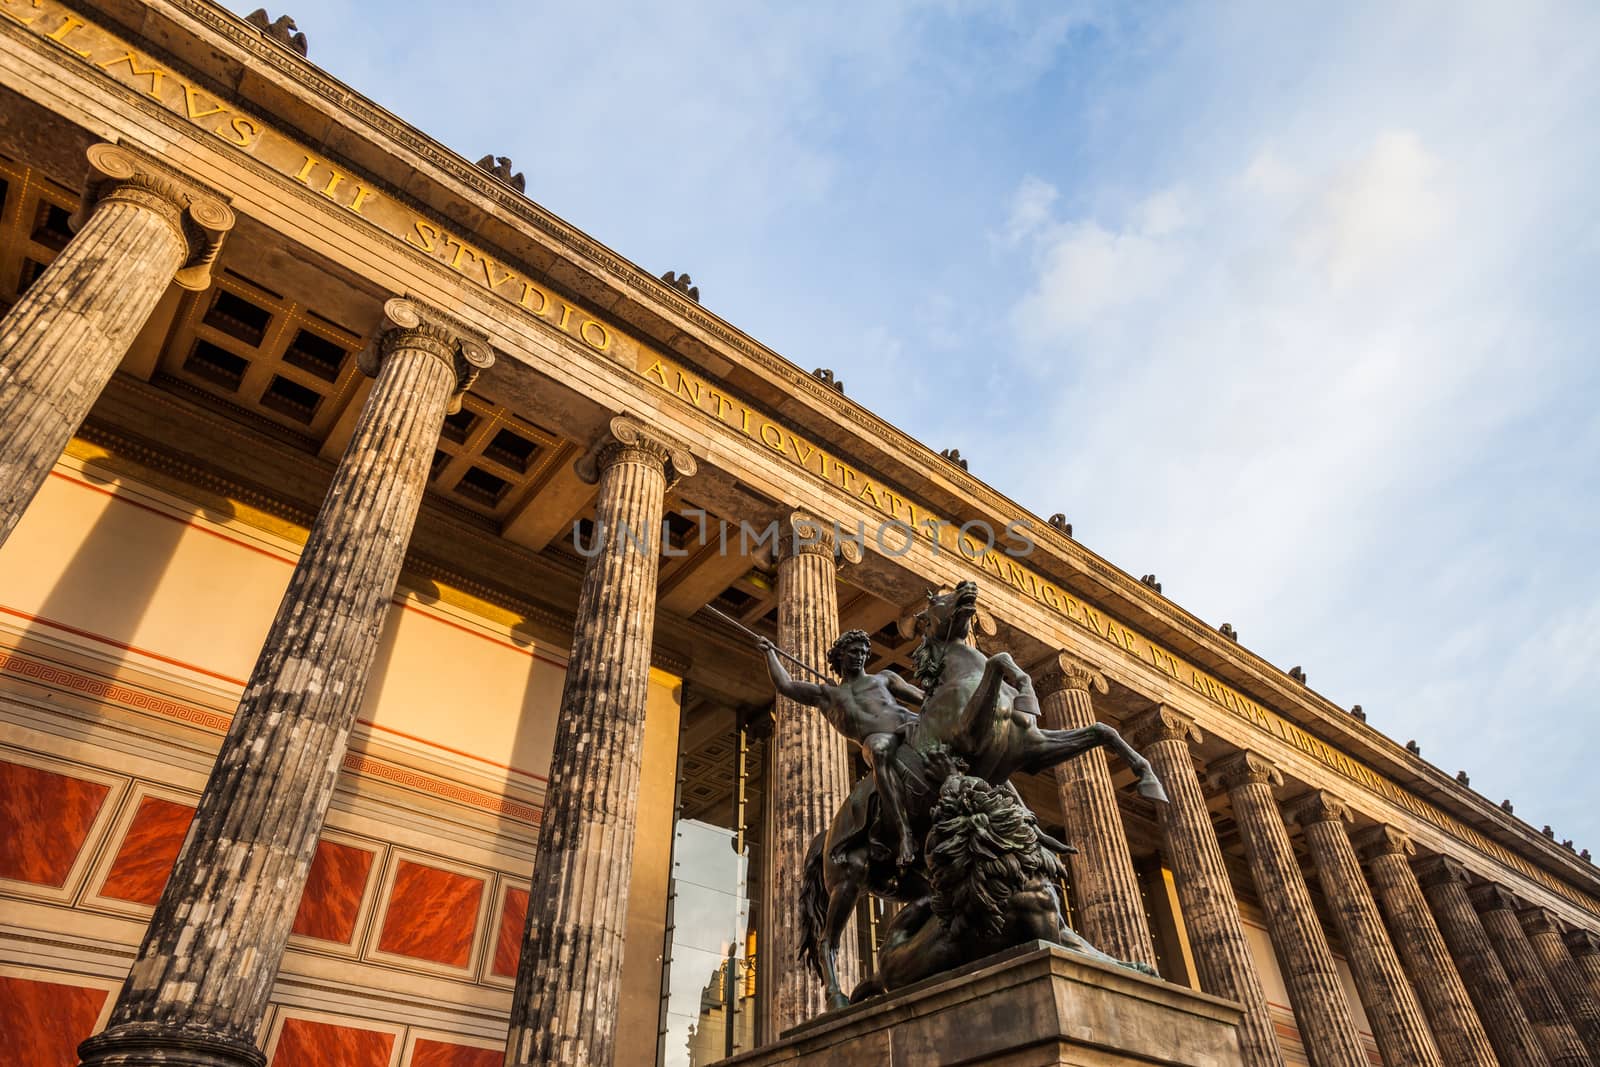 The Altes Museum (Old Museum) in Berlin, Germany